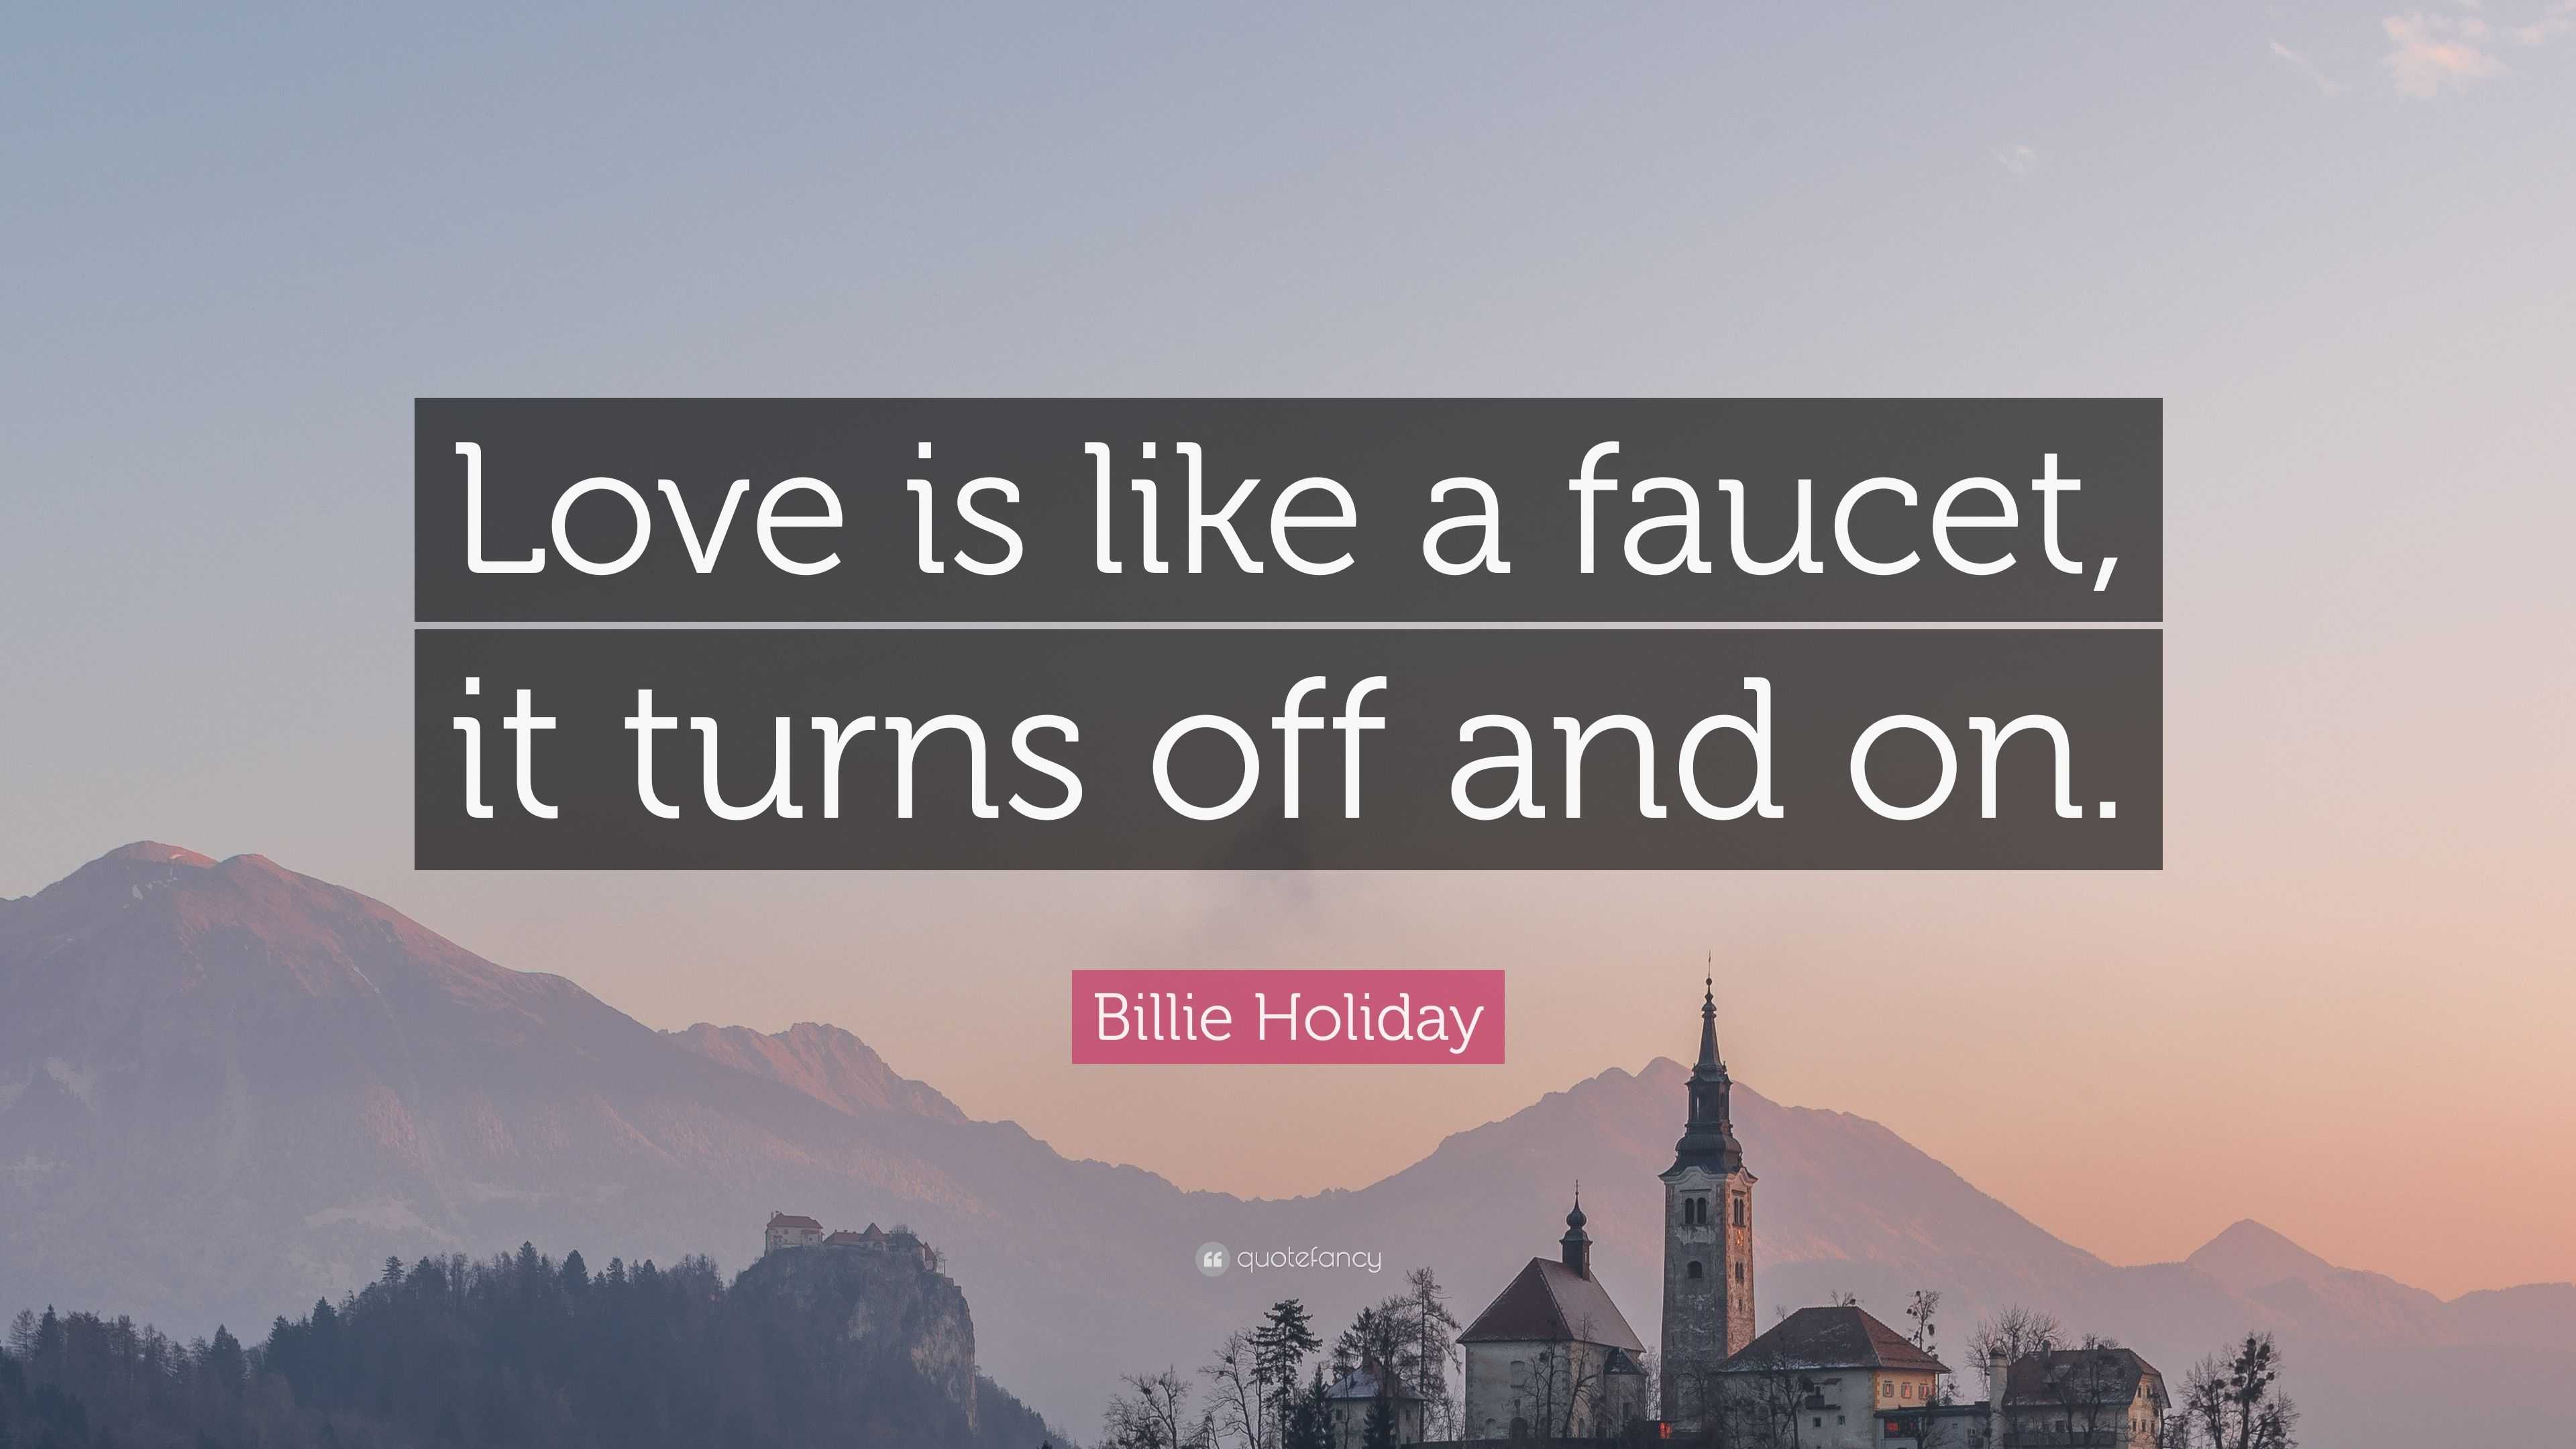 Billie Holiday Quote “Love is like a faucet it turns off and on